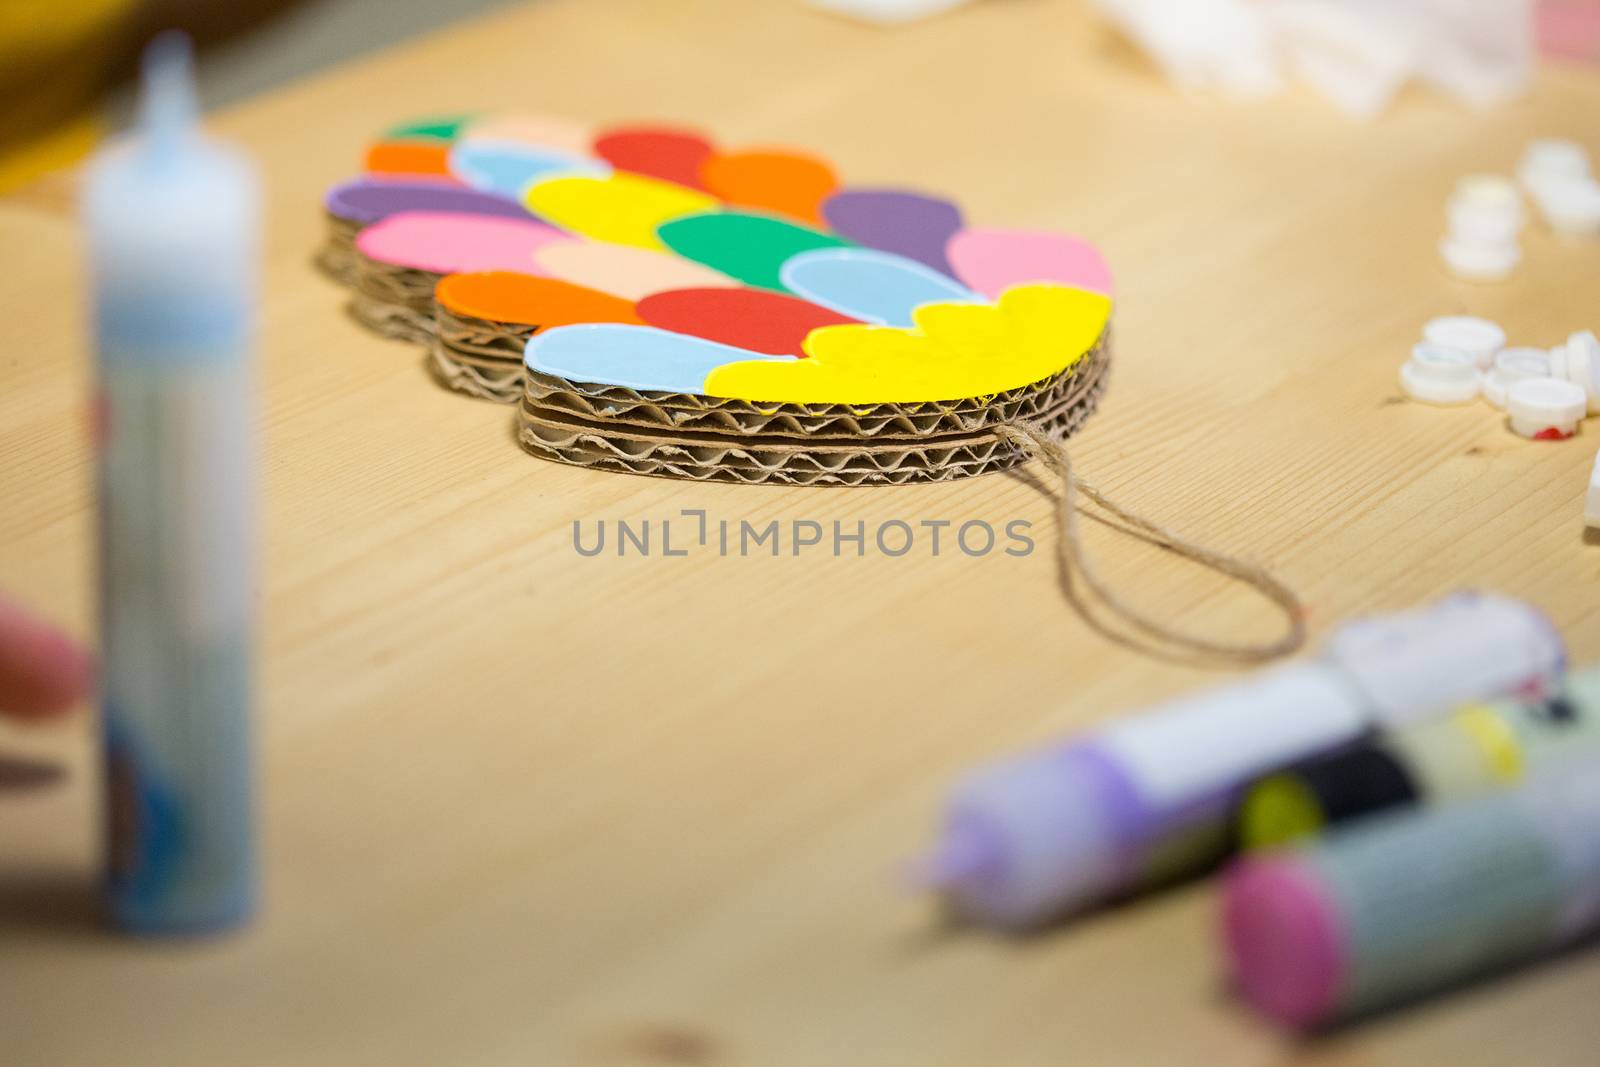 Colorful toys made of cardboard on a wooden table. Creative background